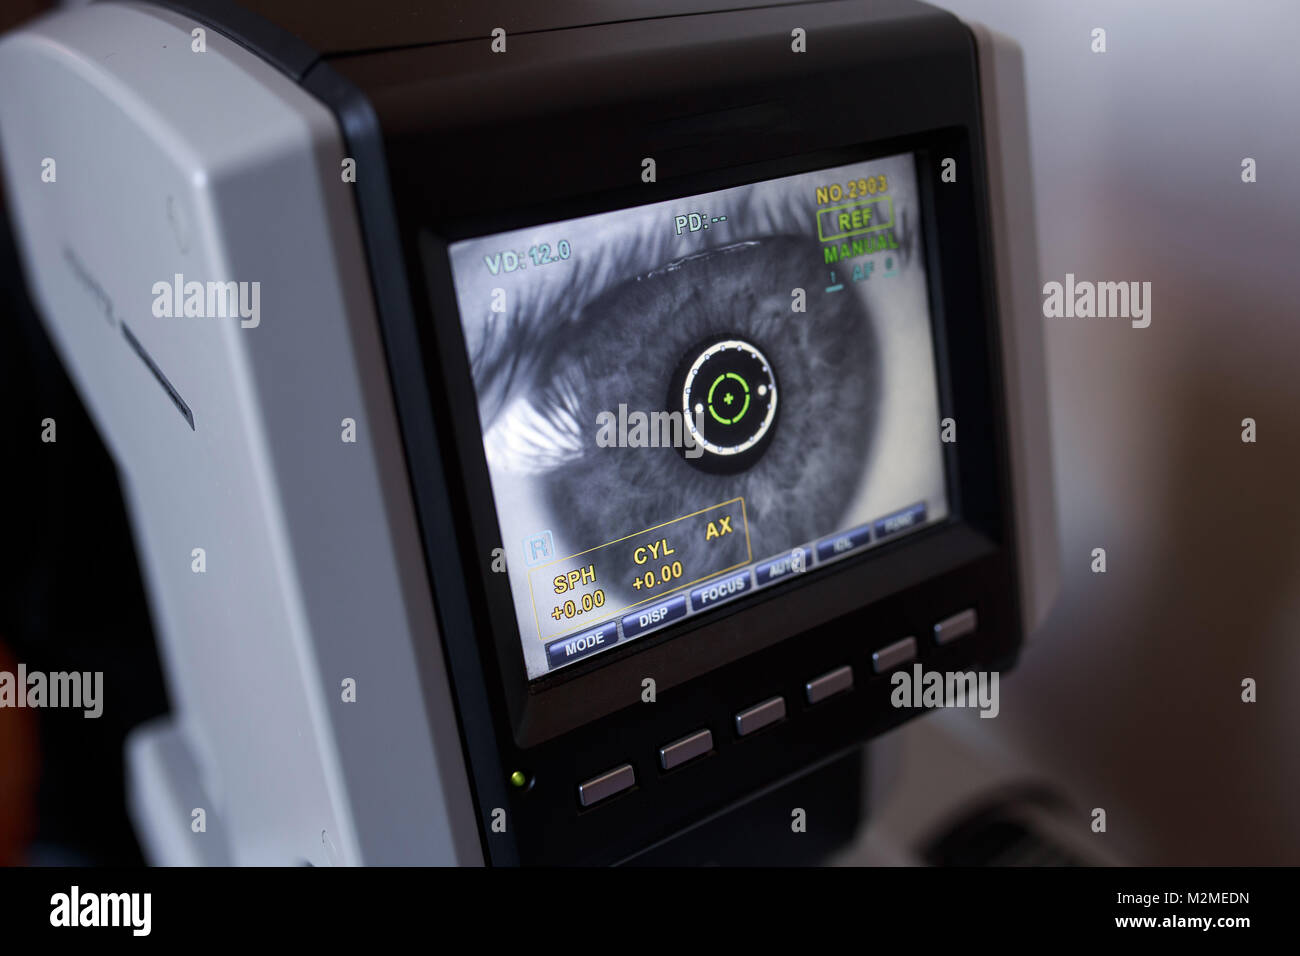 Auto-Ref-Keratometer display with an eye on it. Autorefractor Keratometer. eye test machine in physical examination. Stock Photo